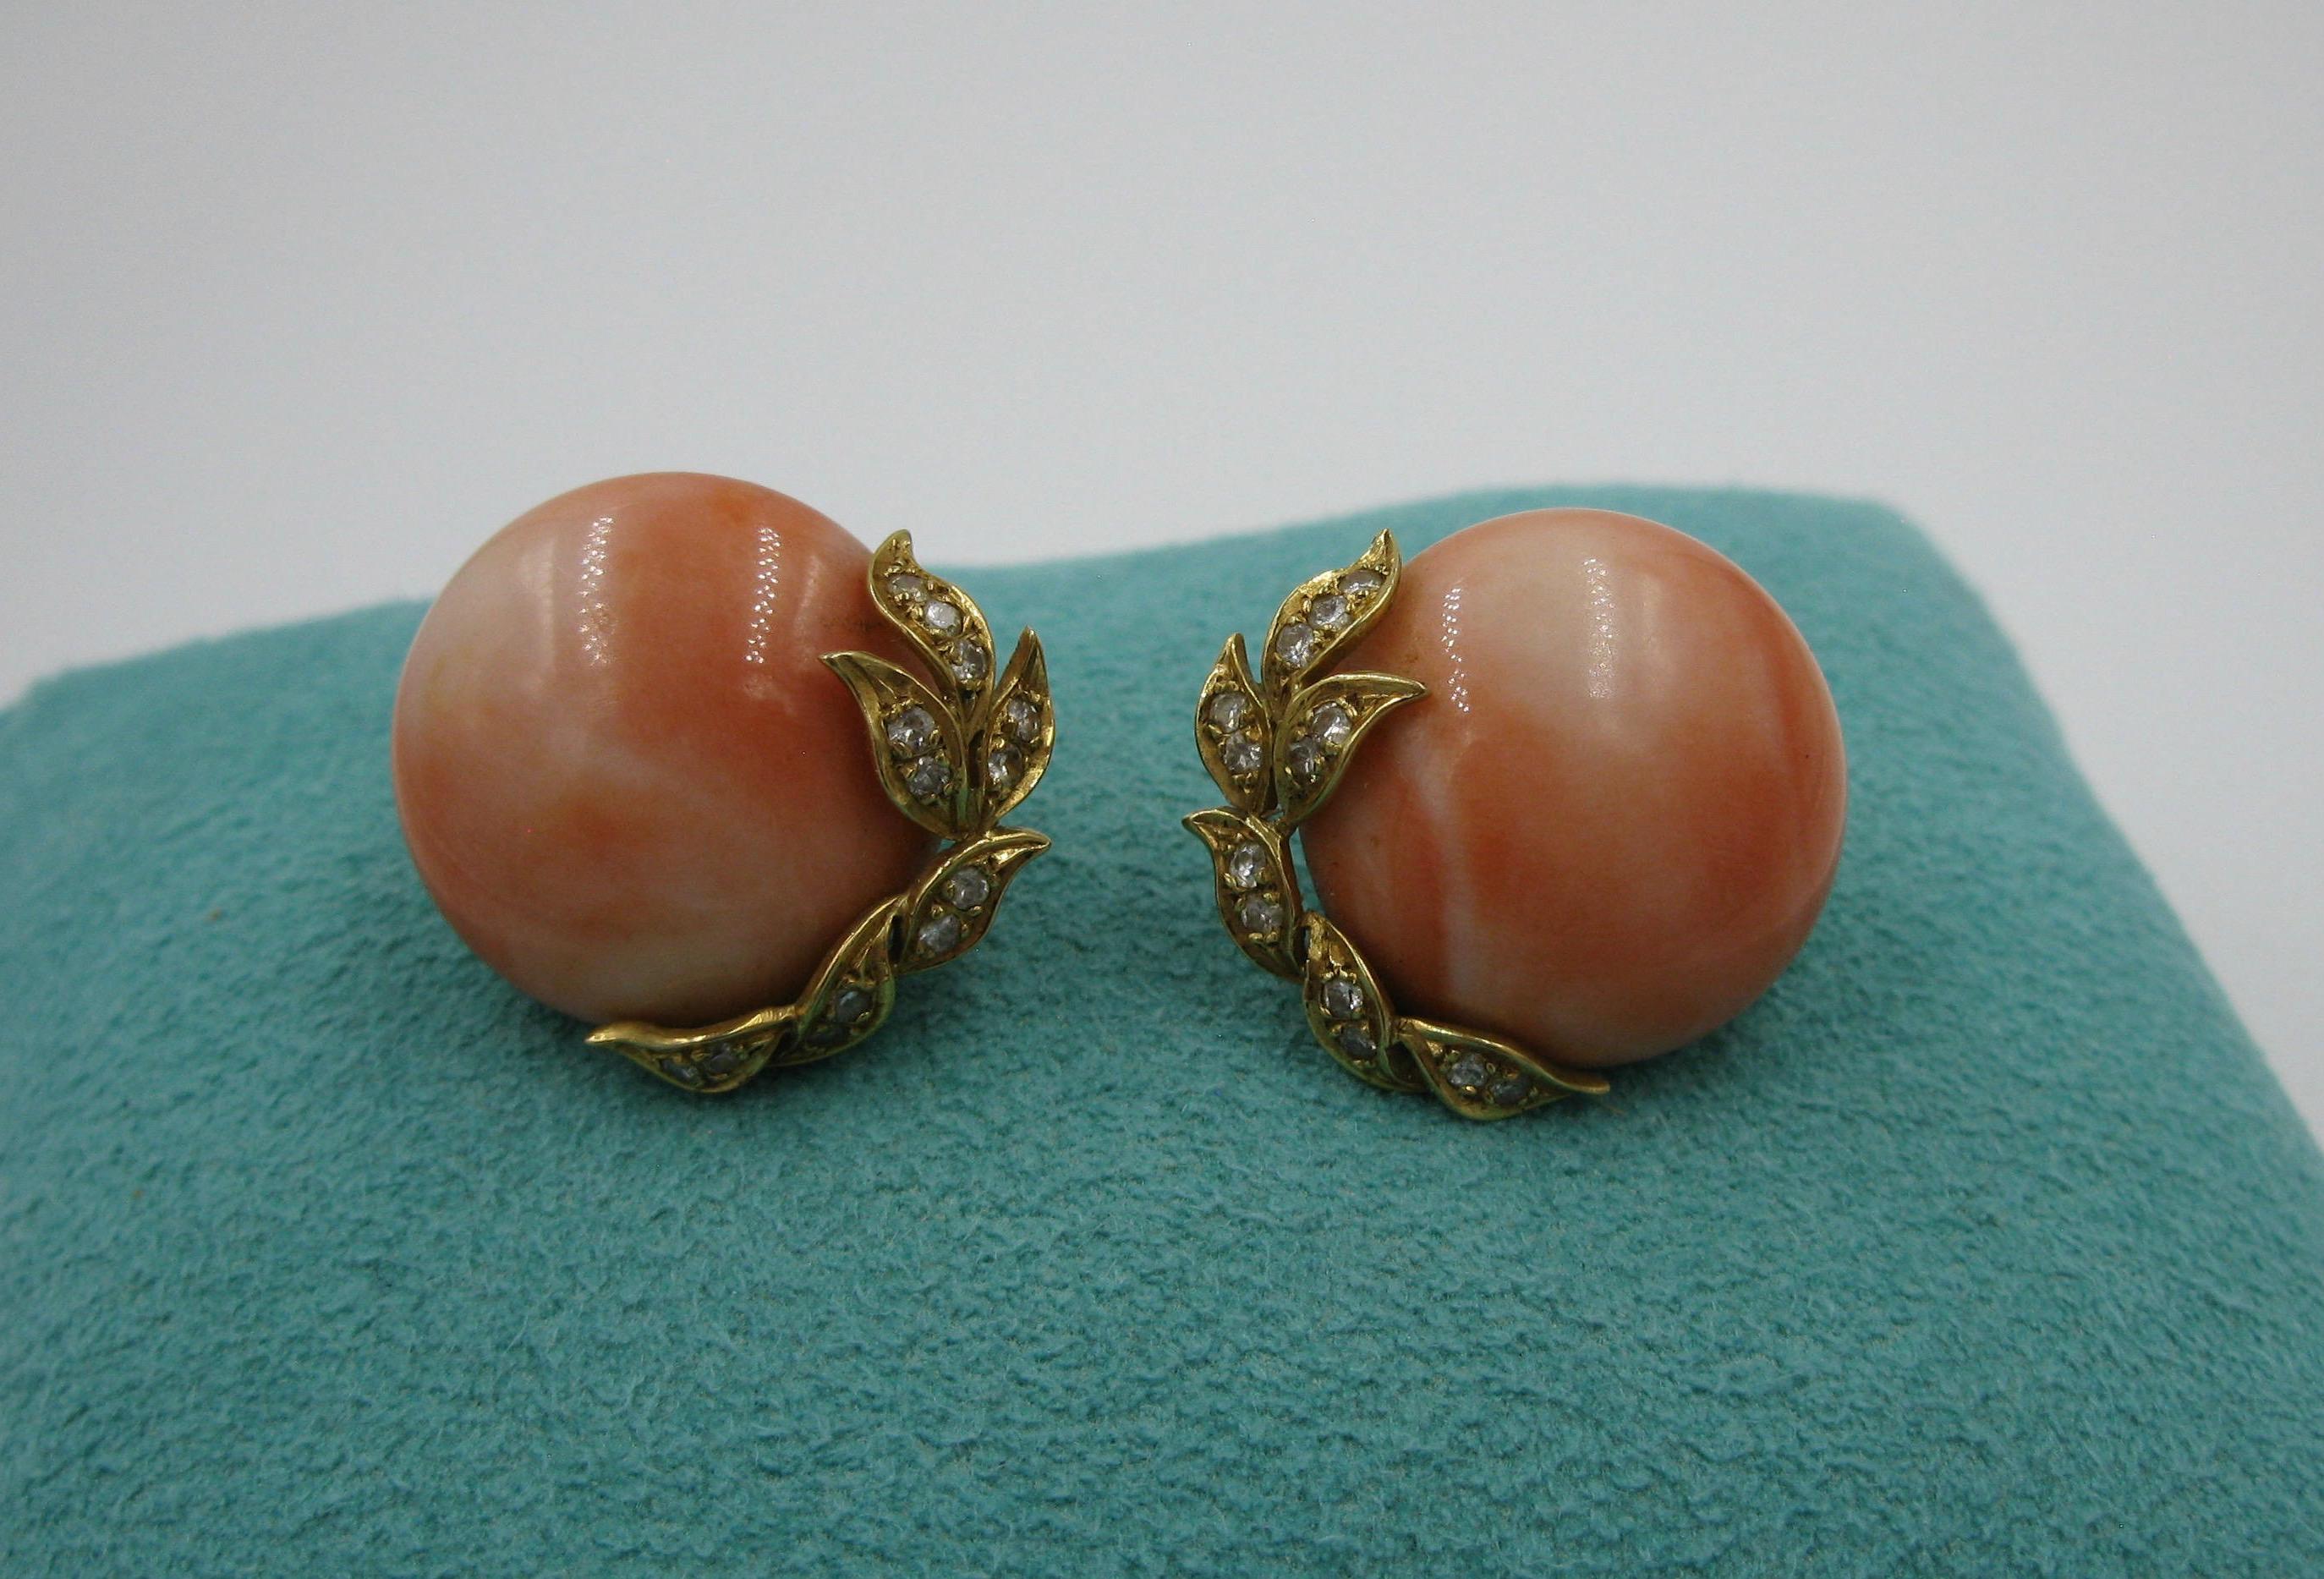 Cabochon Natural Coral Diamond 18 Karat Gold Earrings Art Deco Hollywood Regency For Sale